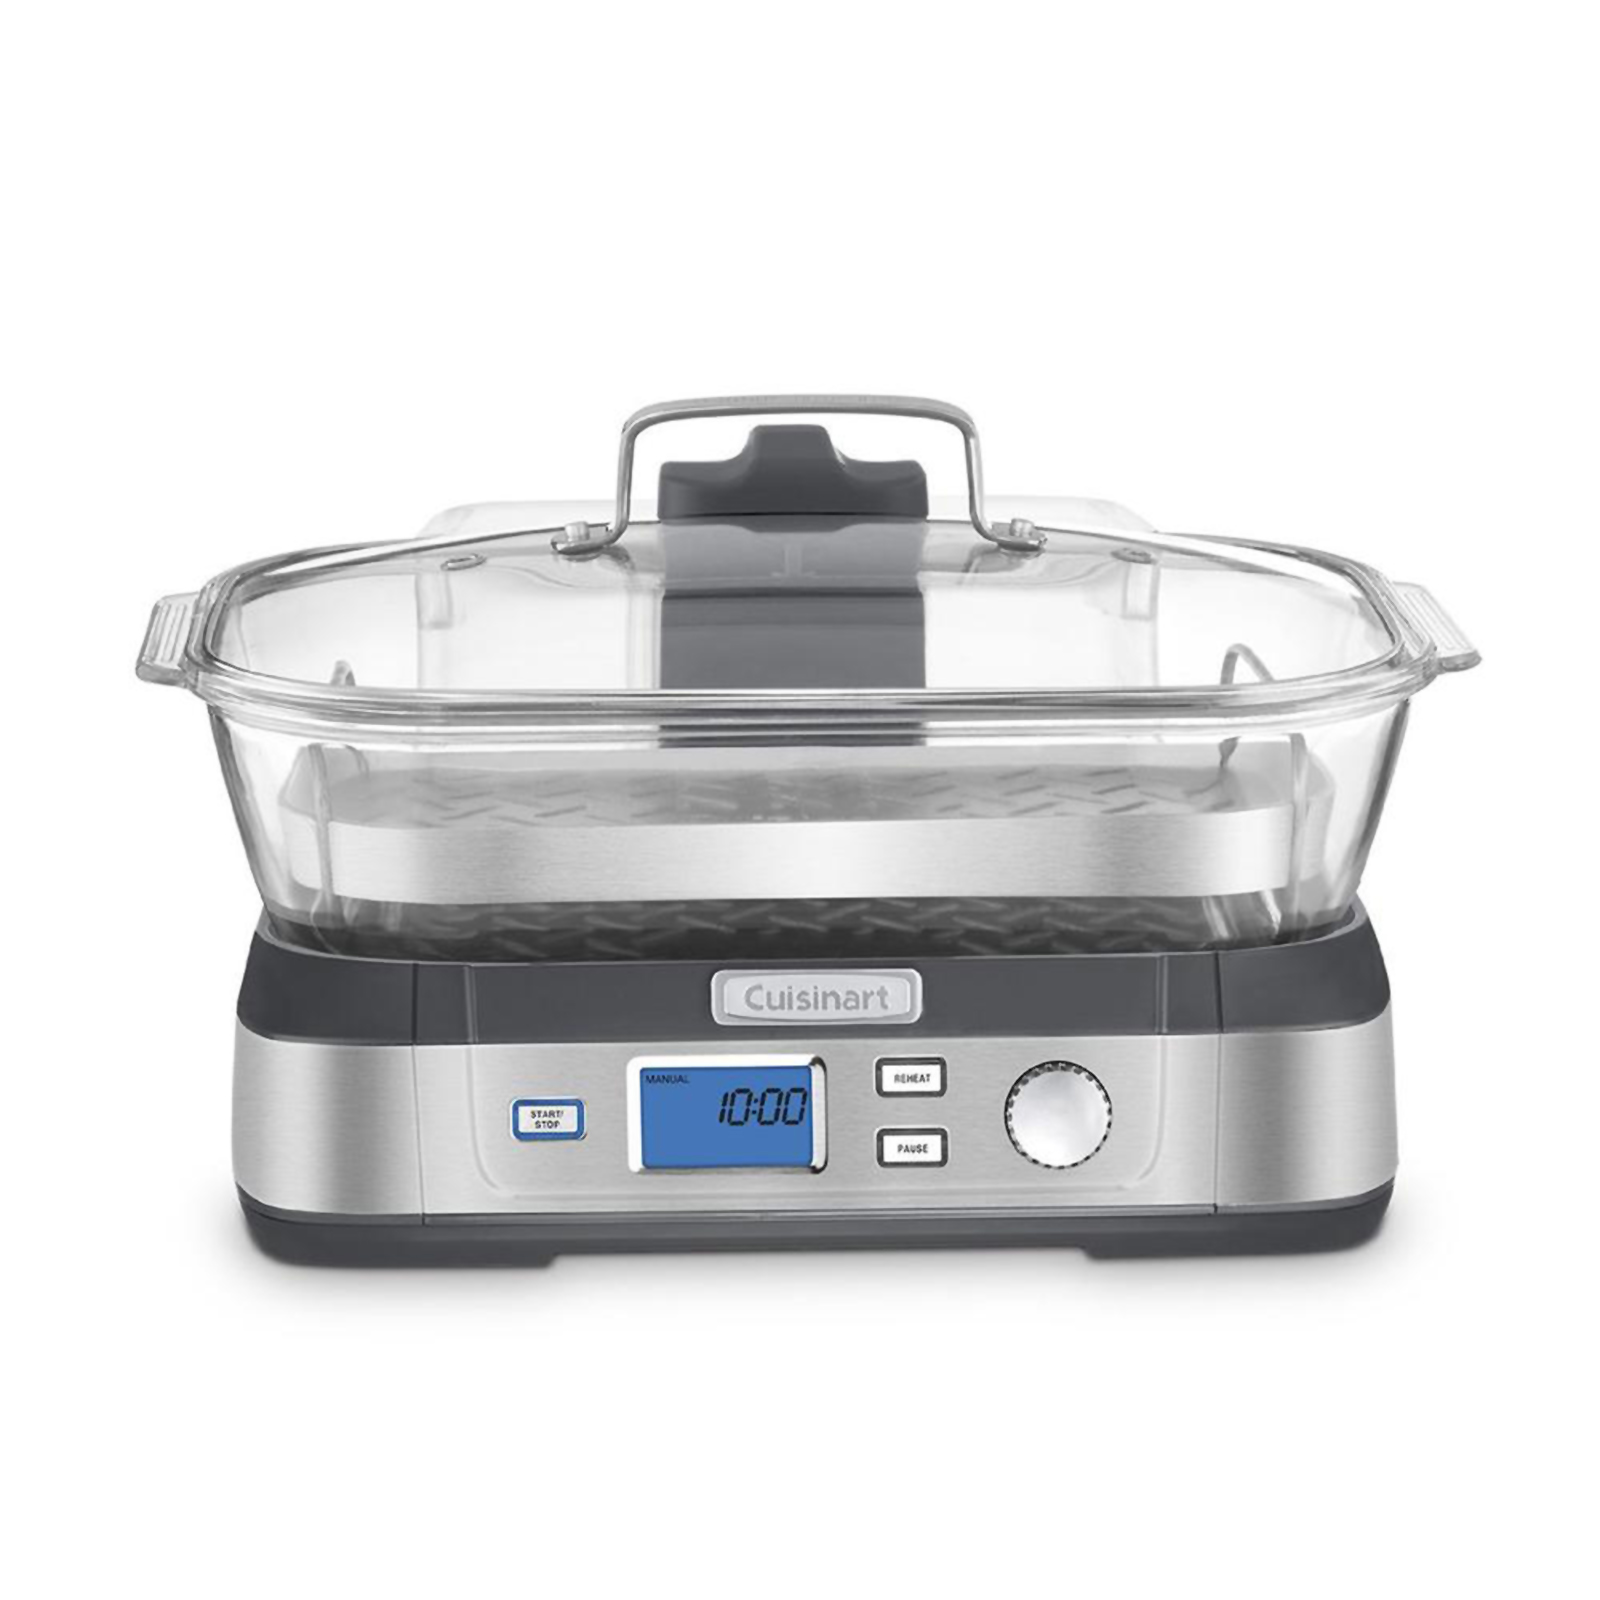 Cuisinart STM-1000 CookFresh 5L Digital Glass Steamer with 5 Settings